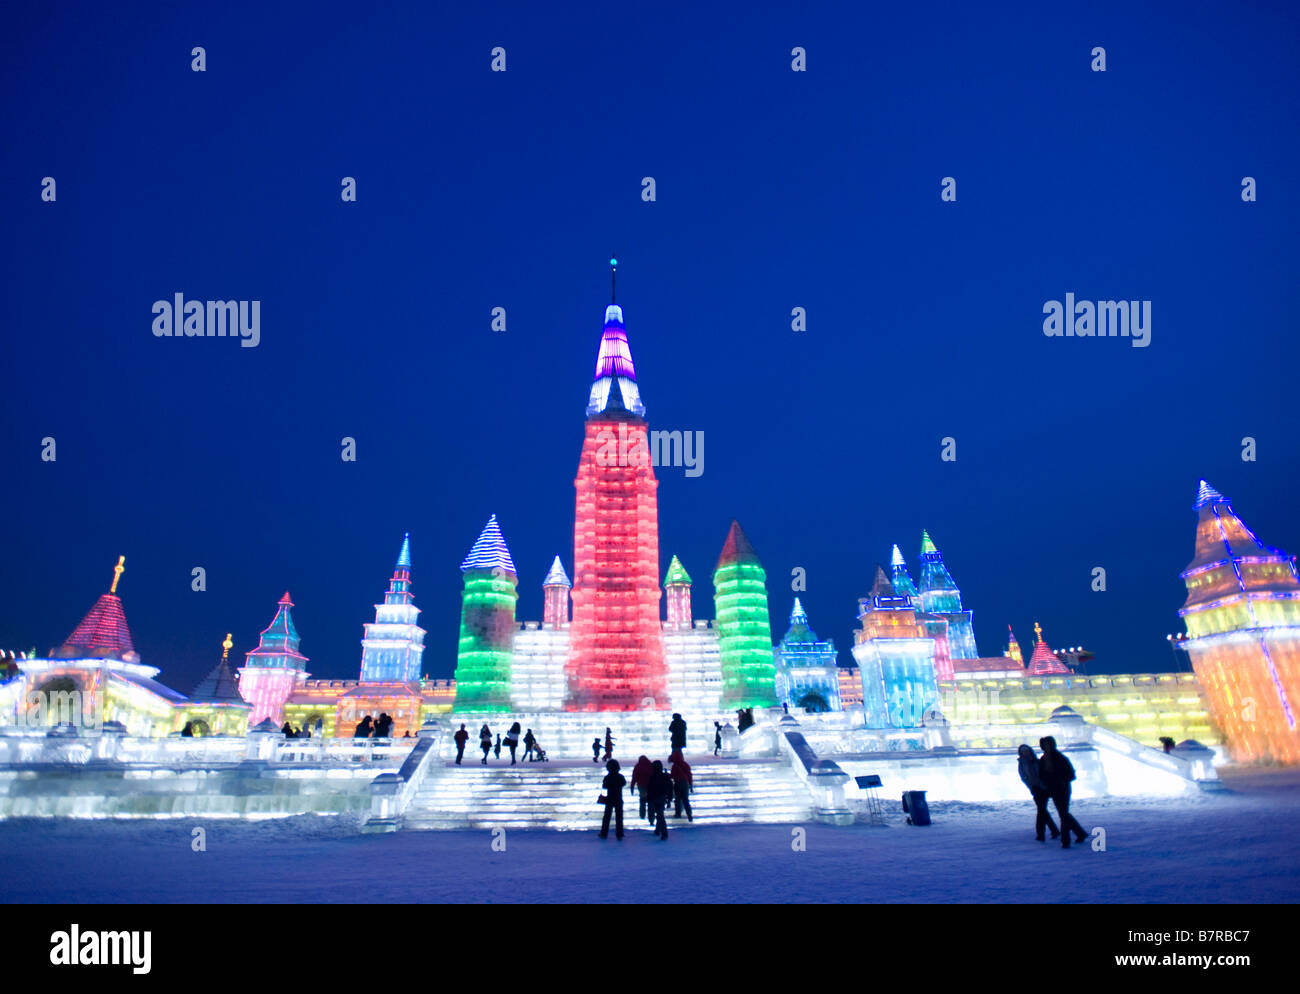 Spectacular illuminated ice sculptures at the Harbin Ice and Snow Festival in Heilongjiang Province China Stock Photo